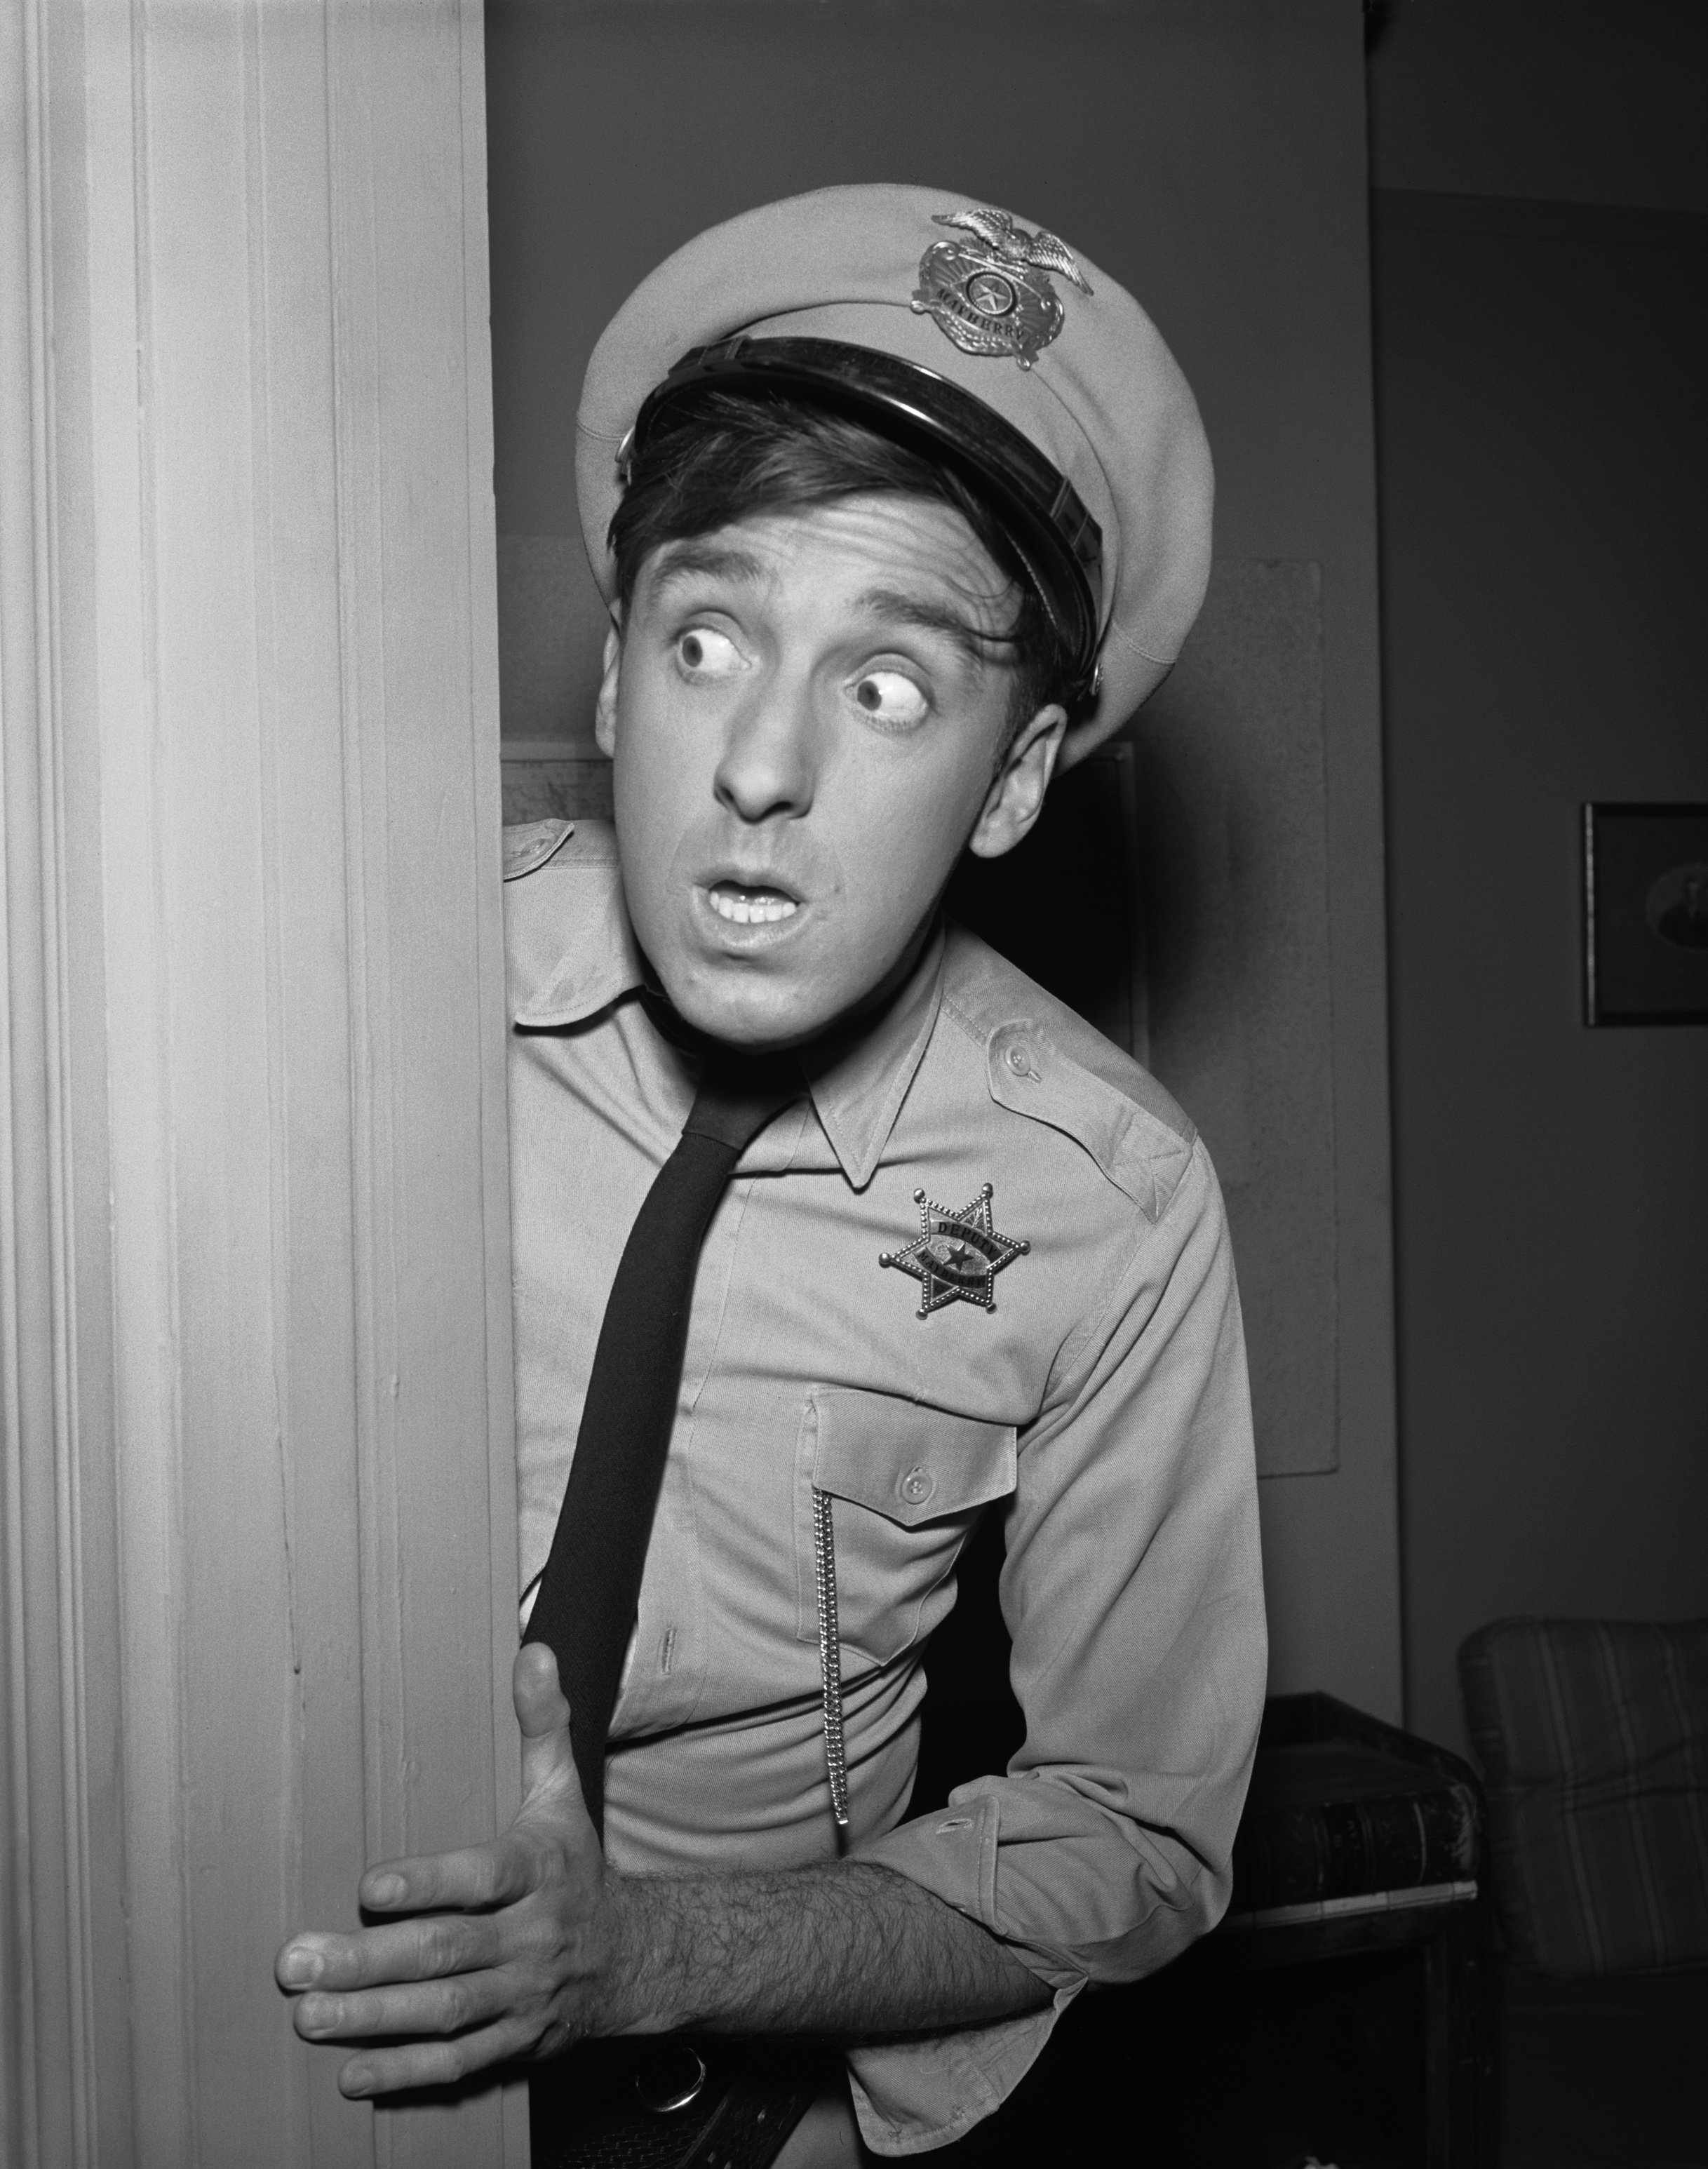 Jim Nabors as Gomer Pyle on 'The Andy Griffith Show', 1963